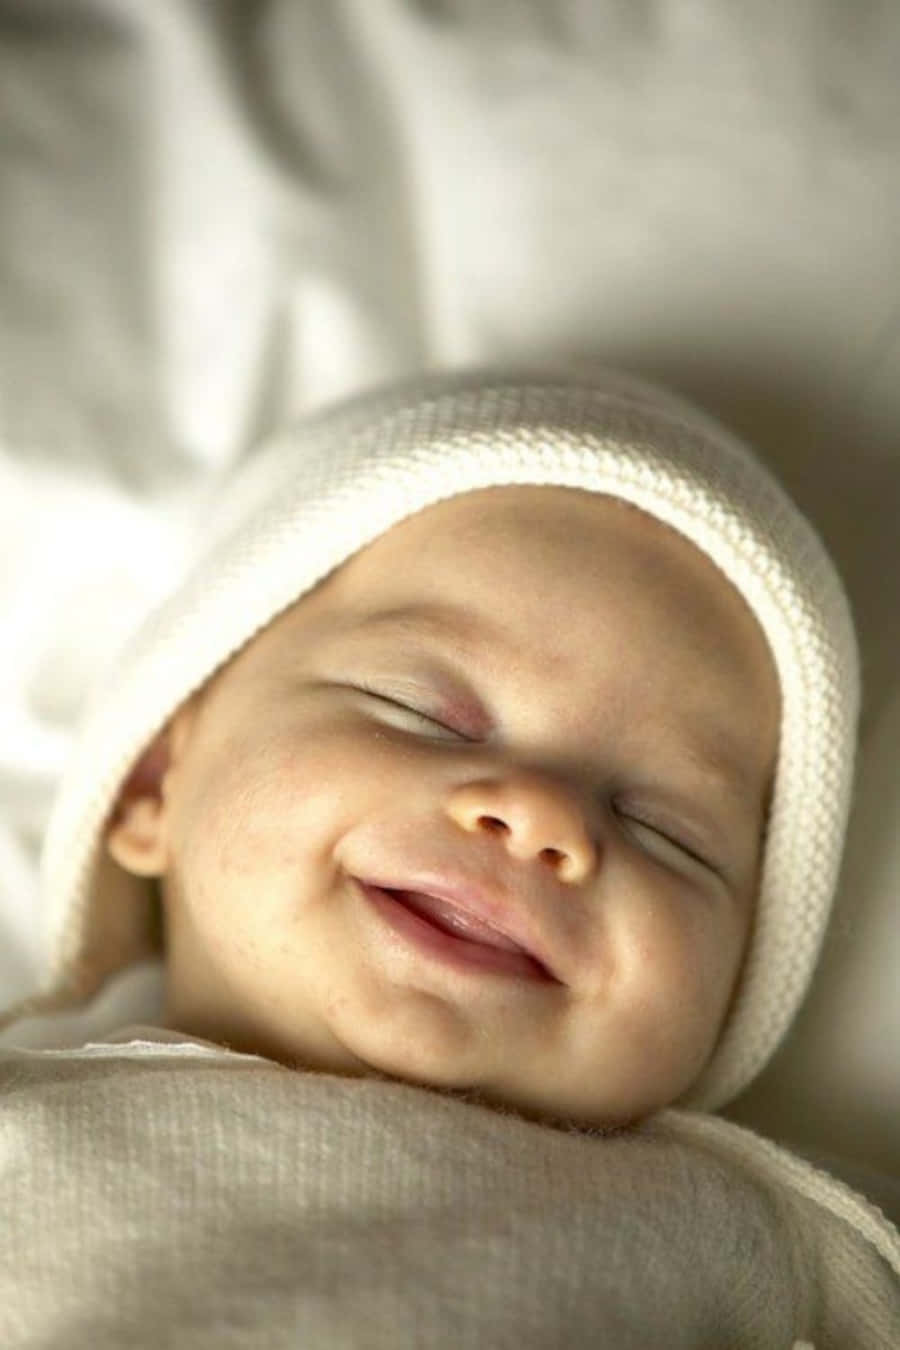 Download Cute Sleeping Baby Smile Picture | Wallpapers.com